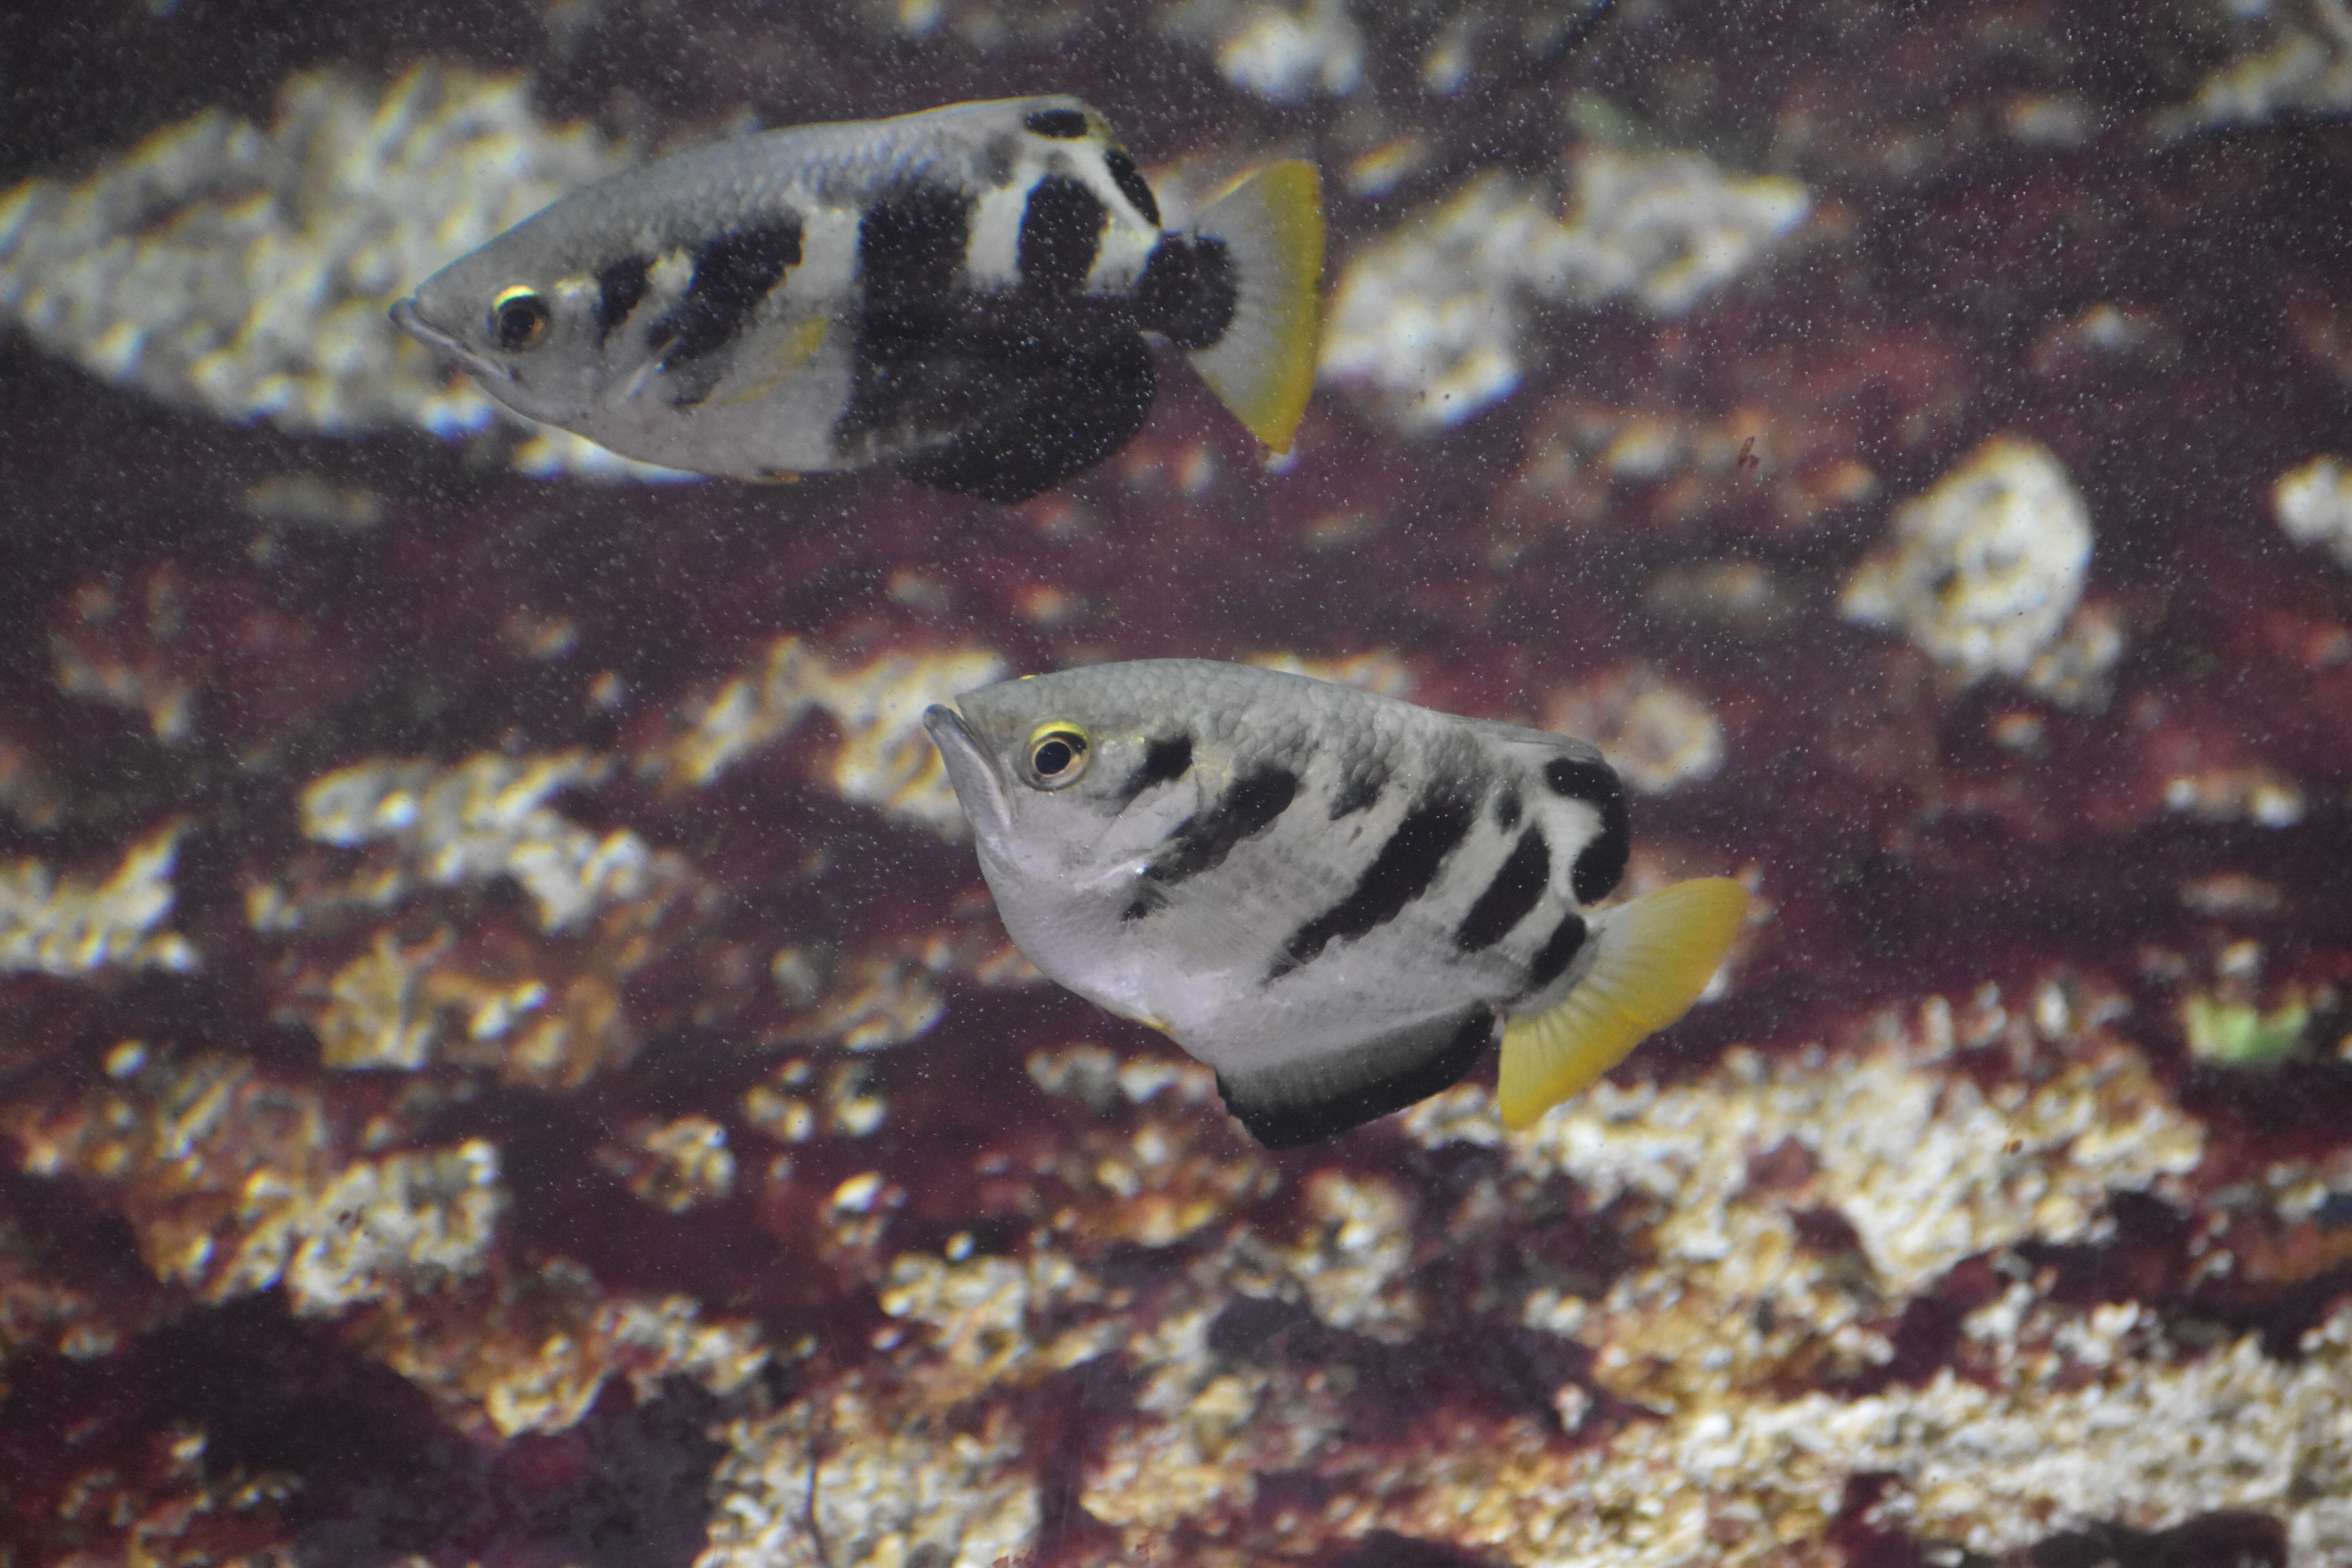 Image of Banded Archerfish